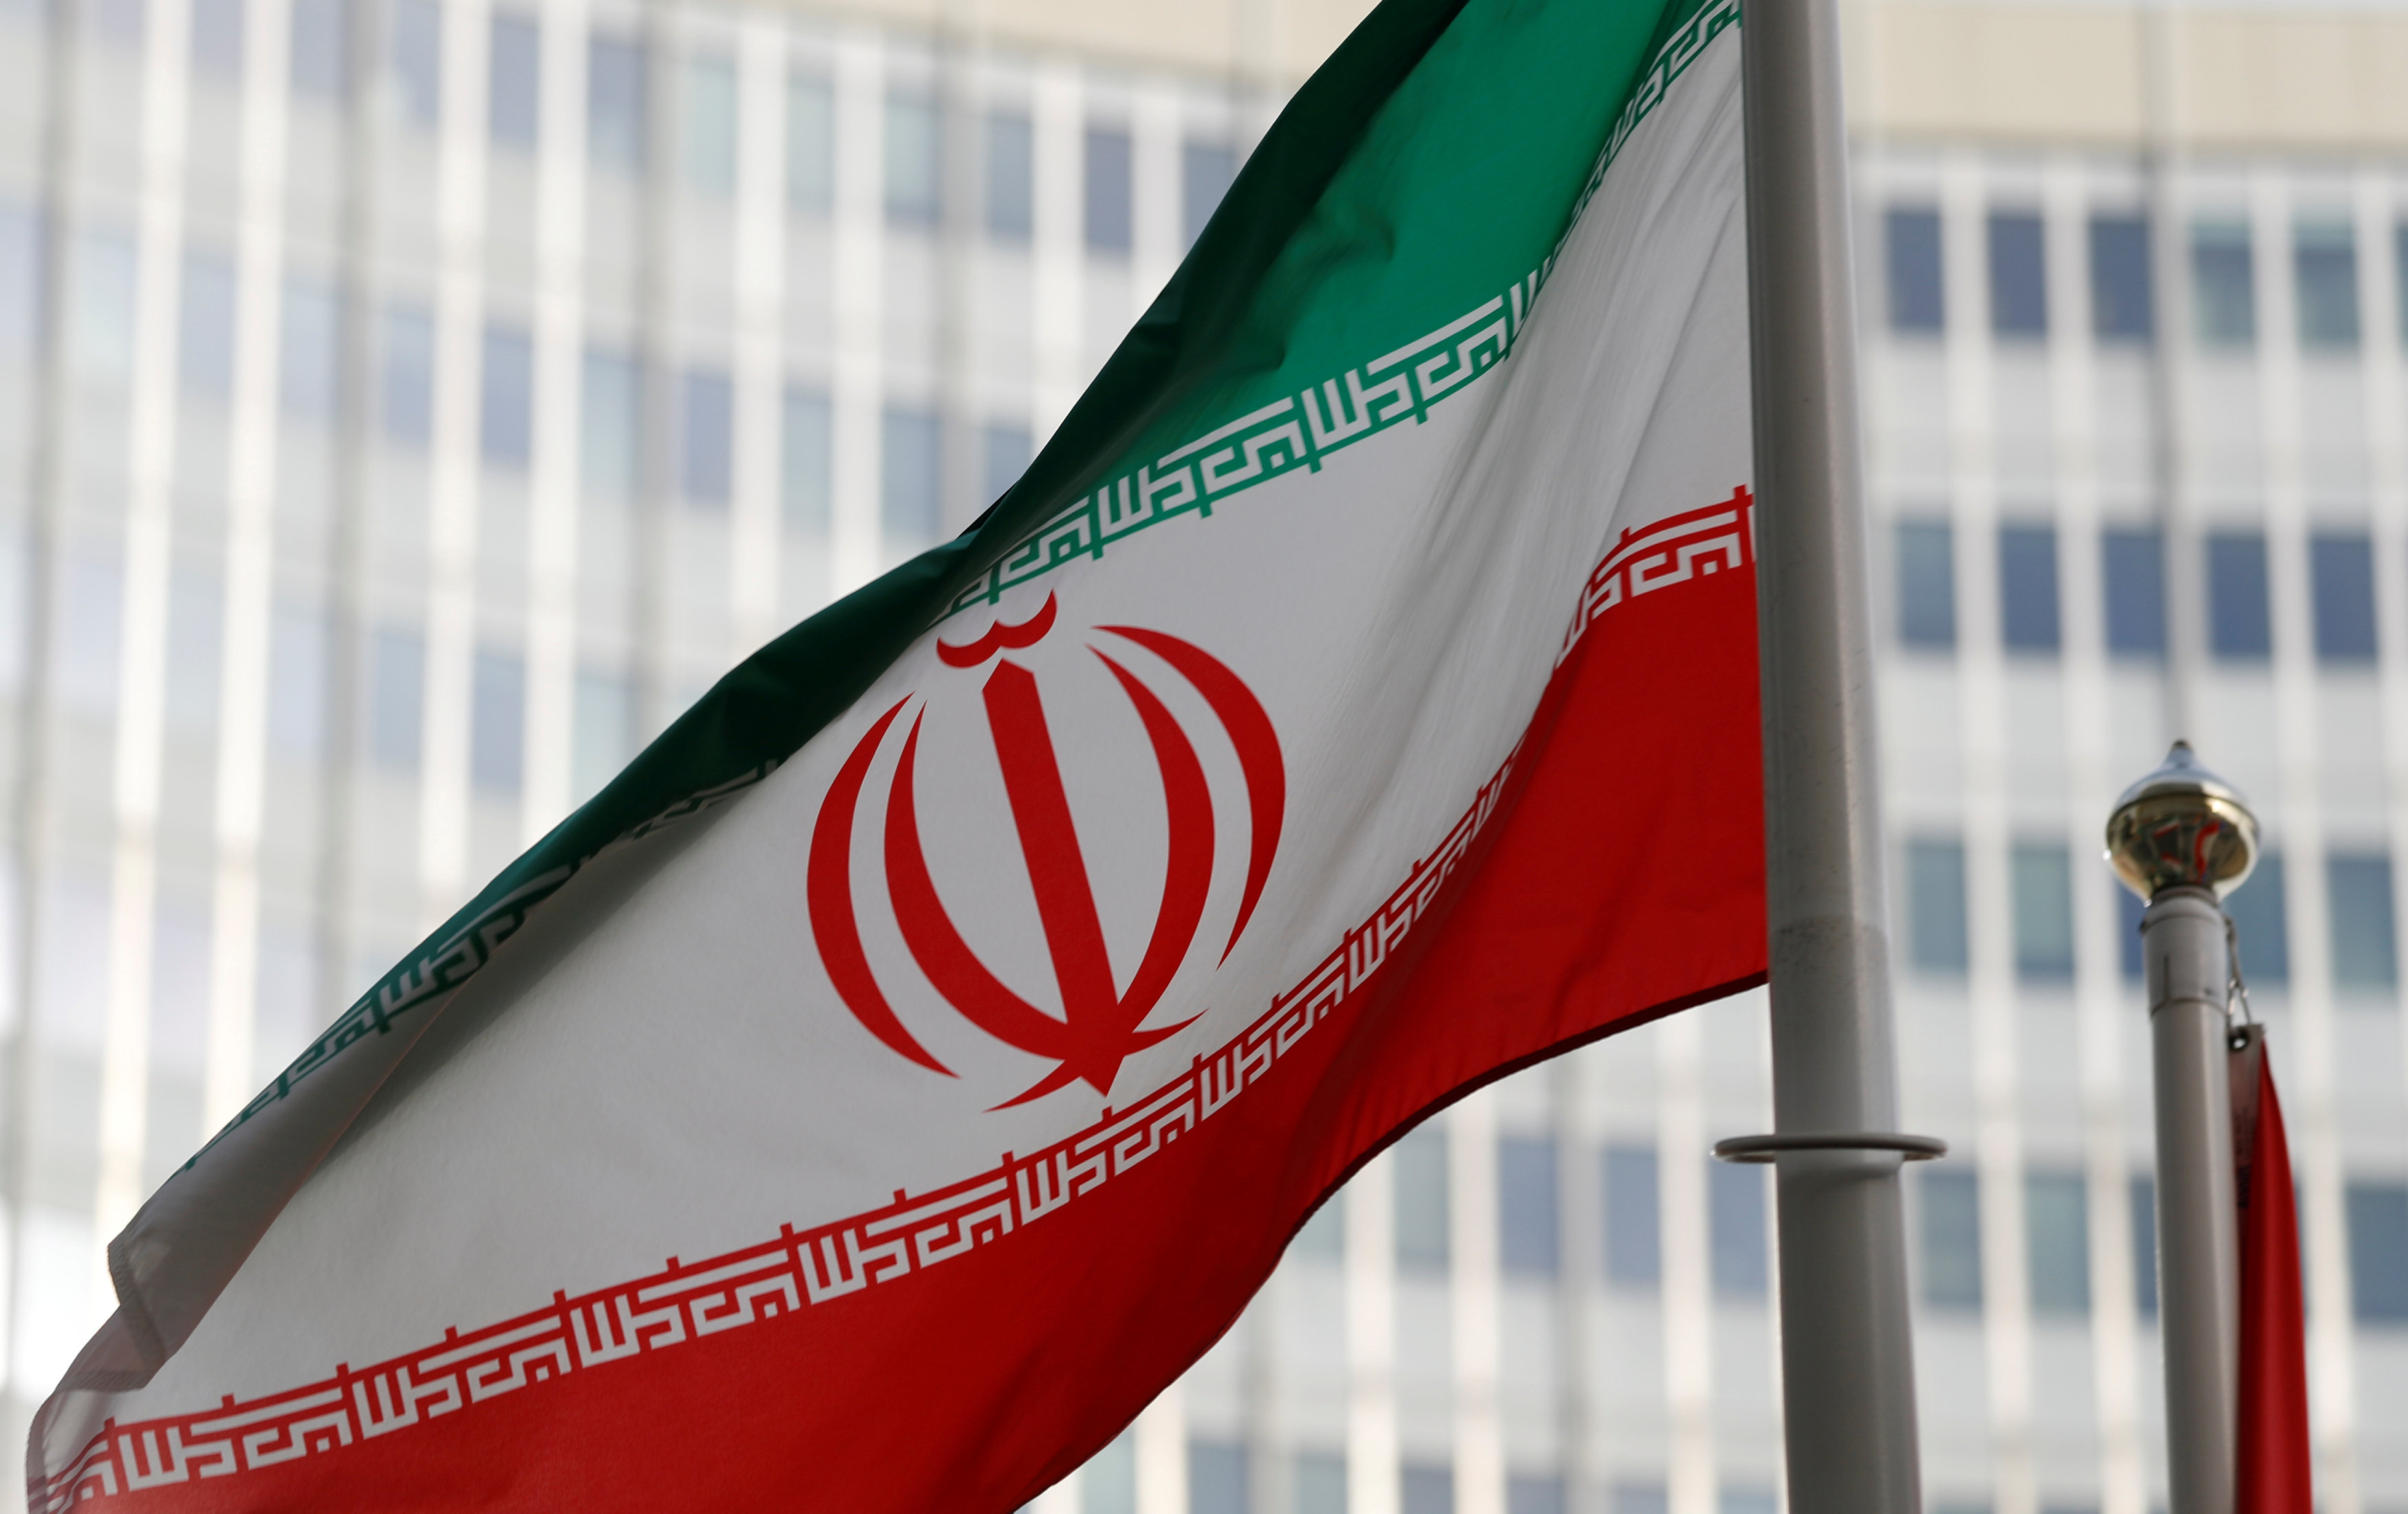 The Iranian flag flutters in front the International Atomic Energy Agency (IAEA) headquarters in Vienna